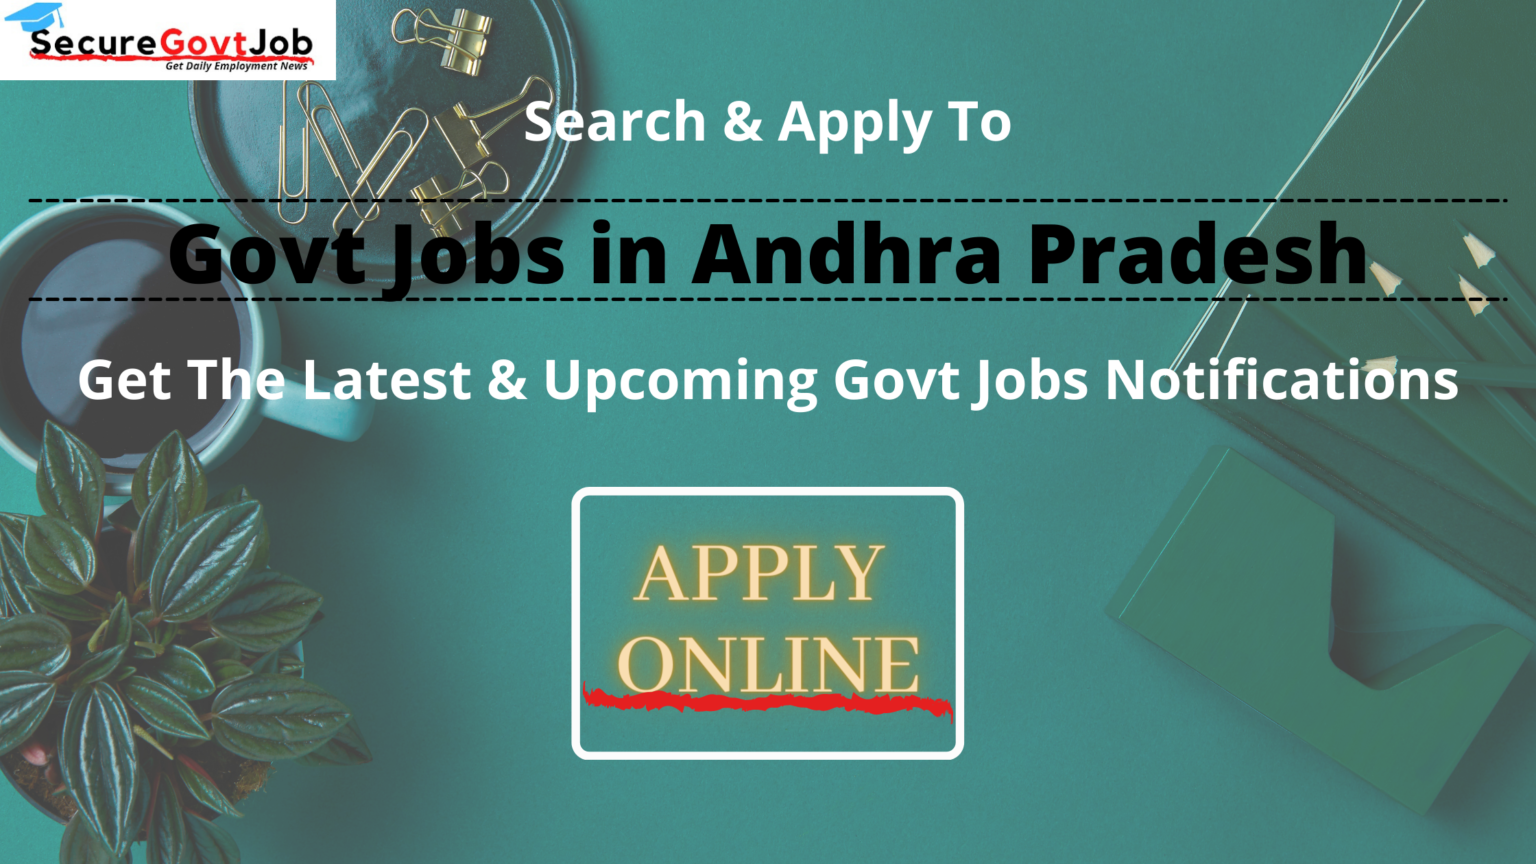 New jobs in government sector 2012 in andhra pradesh